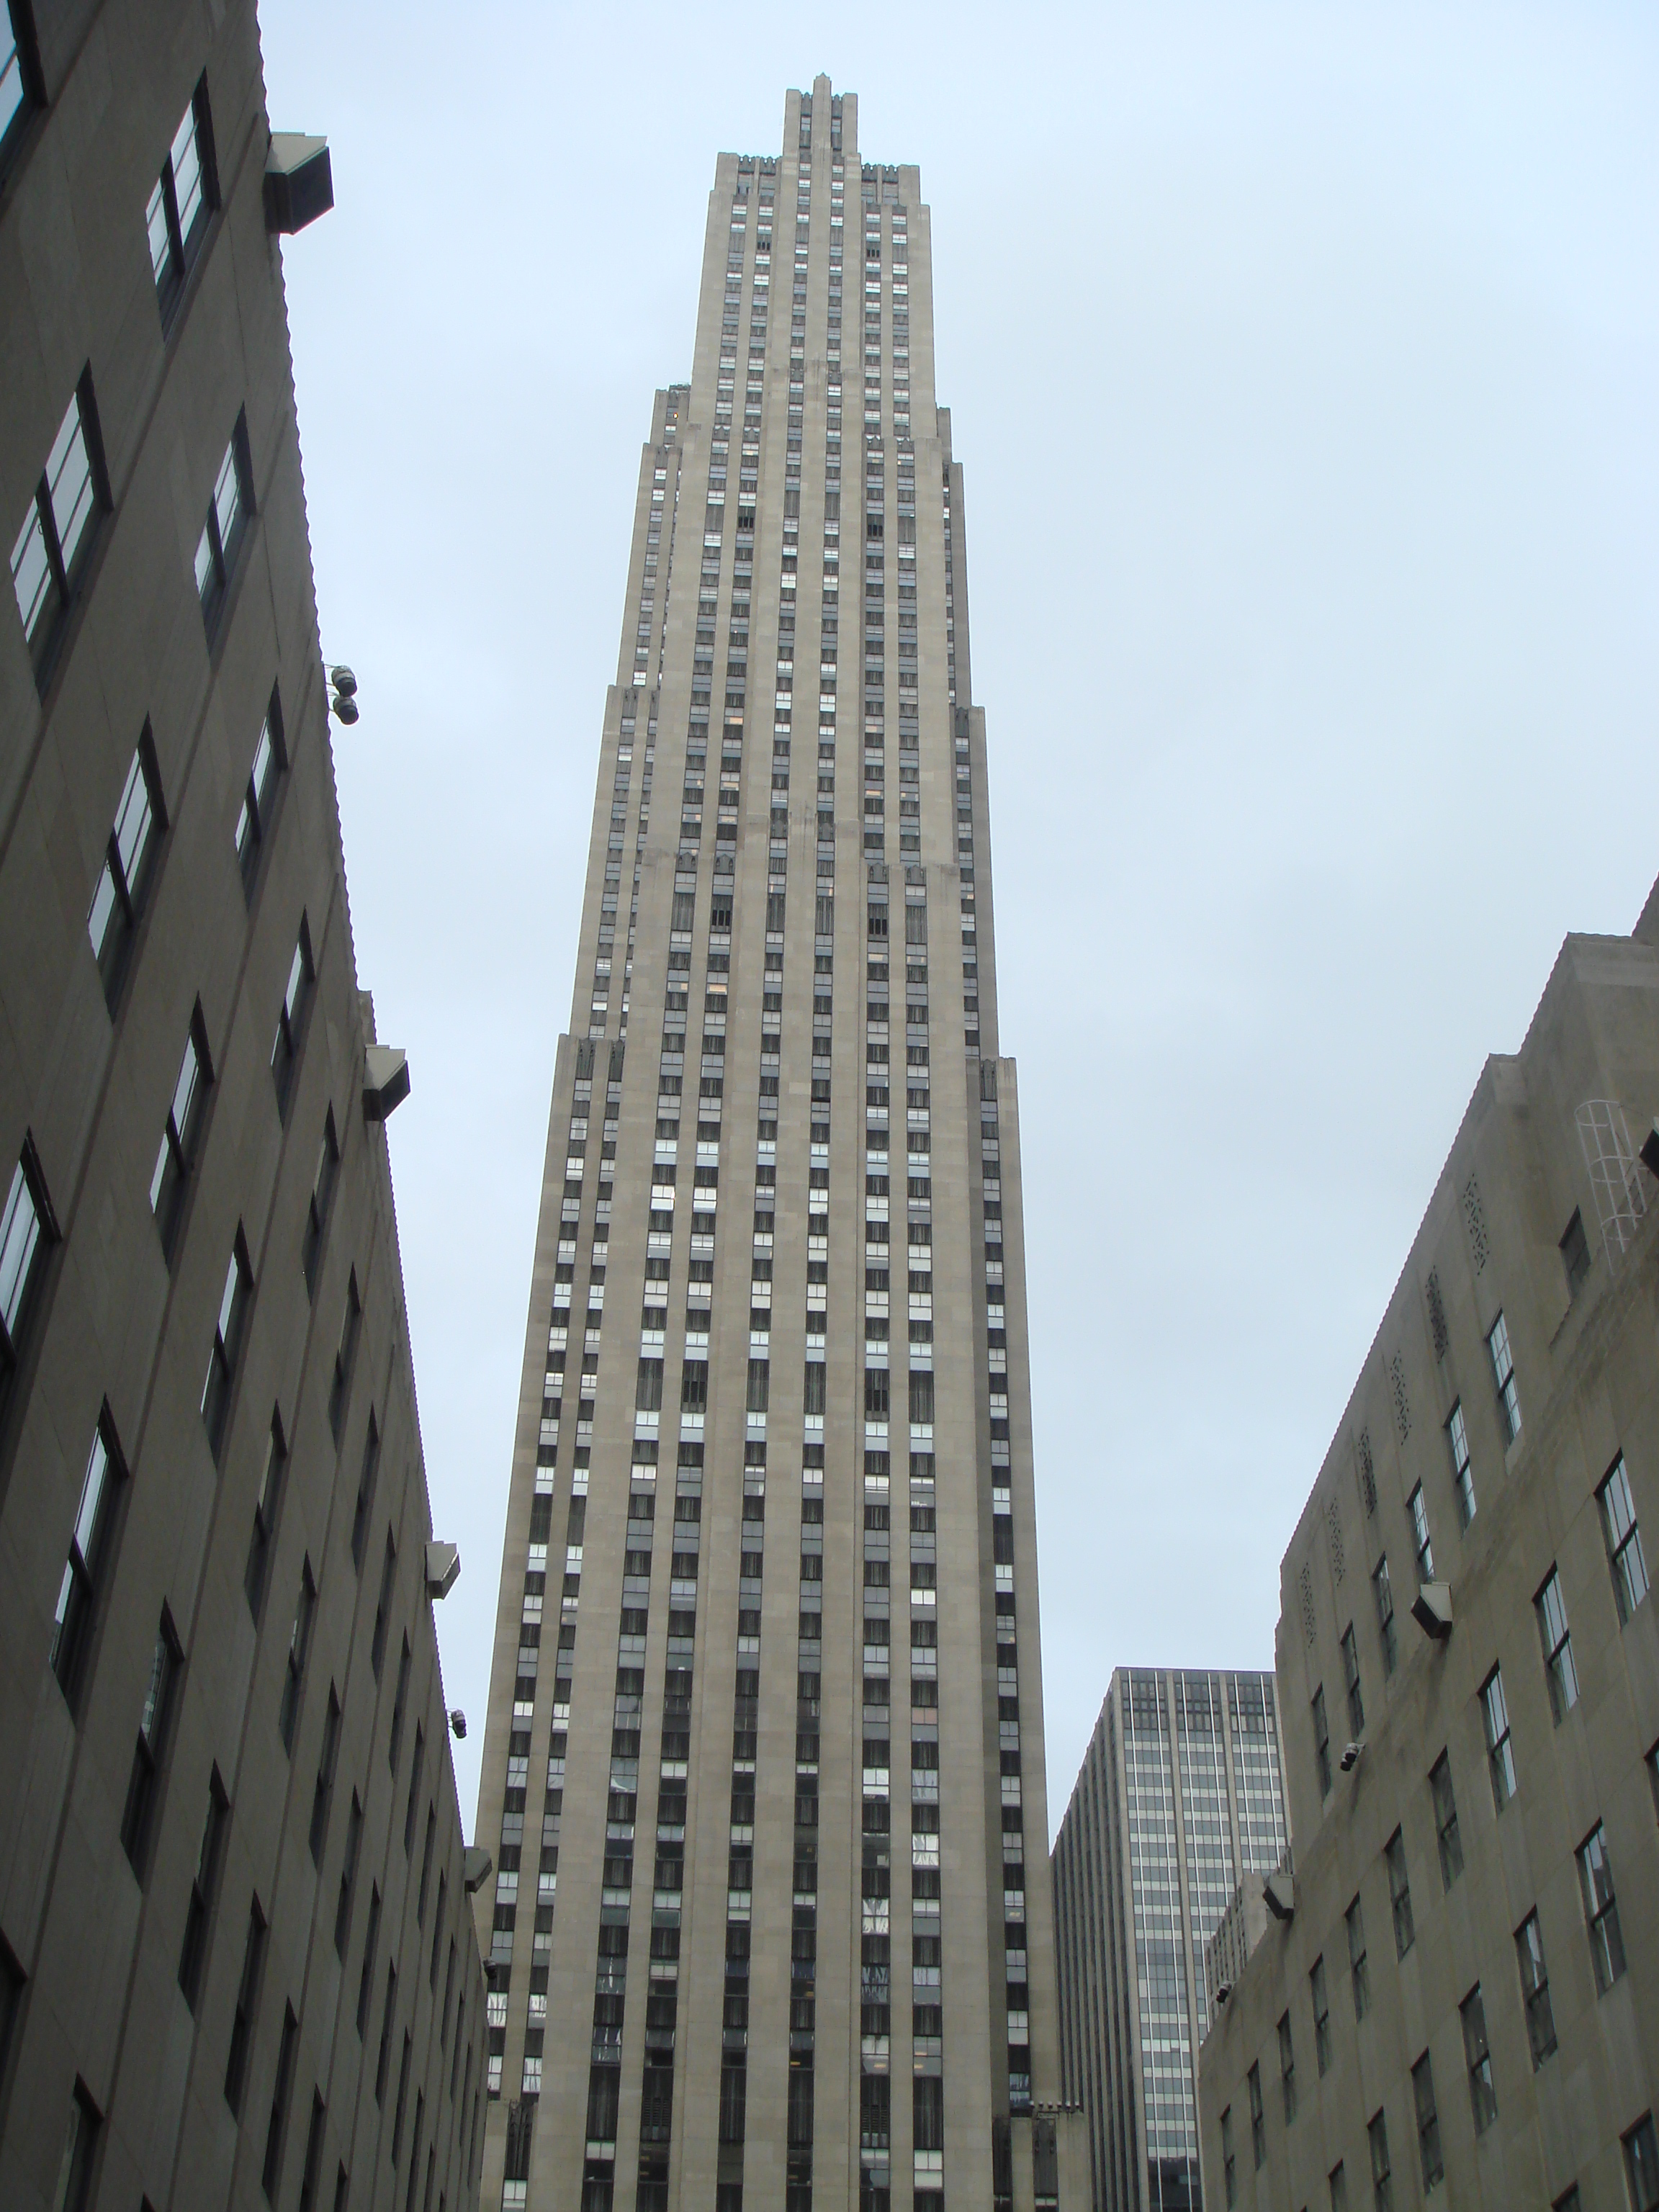 When was the chrysler building built and finished #5